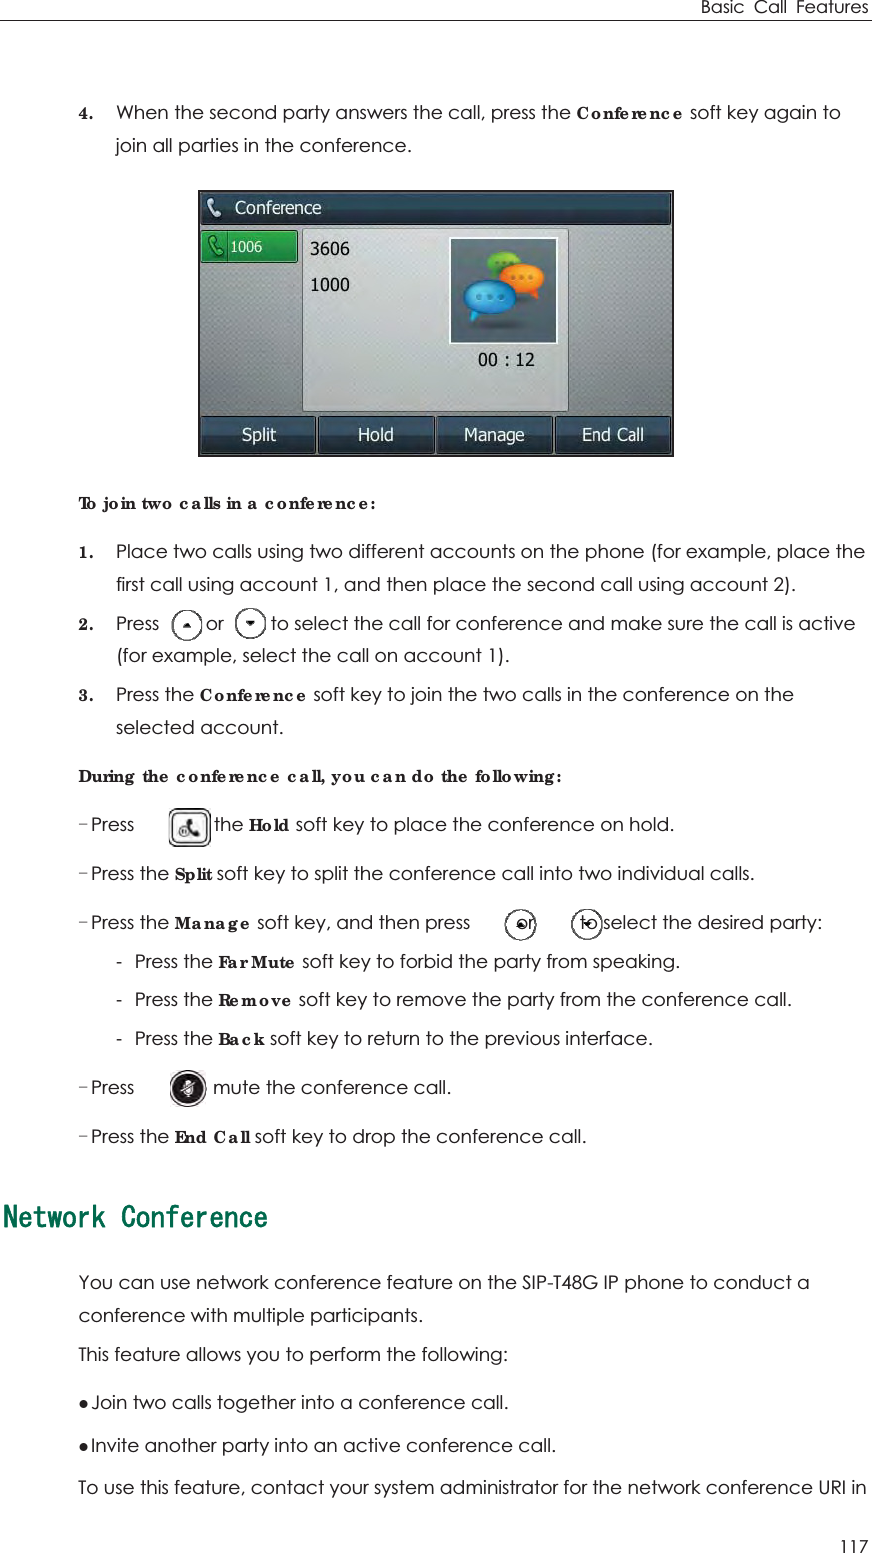 Basic Call Features 117  4. When the second party answers the call, press the Conference soft key again to join all parties in the conference.  To join two calls in a conference: 1. Place two calls using two different accounts on the phone (for example, place the first call using account 1, and then place the second call using account 2). 2. Press          or          to select the call for conference and make sure the call is active (for example, select the call on account 1).   3. Press the Conference soft key to join the two calls in the conference on the selected account. During the conference call, you can do the following: Press      or the Hold soft key to place the conference on hold. Press the Split soft key to split the conference call into two individual calls. Press the Manage soft key, and then press     or     to select the desired party: -Press the Far Mute soft key to forbid the party from speaking. -Press the Remove soft key to remove the party from the conference call. -Press the Back soft key to return to the previous interface. Press      to mute the conference call. Press the End Call soft key to drop the conference call. 0GVYQTM%QPHGTGPEGYou can use network conference feature on the SIP-T48G IP phone to conduct a conference with multiple participants. This feature allows you to perform the following: zJoin two calls together into a conference call. zInvite another party into an active conference call. To use this feature, contact your system administrator for the network conference URI in 